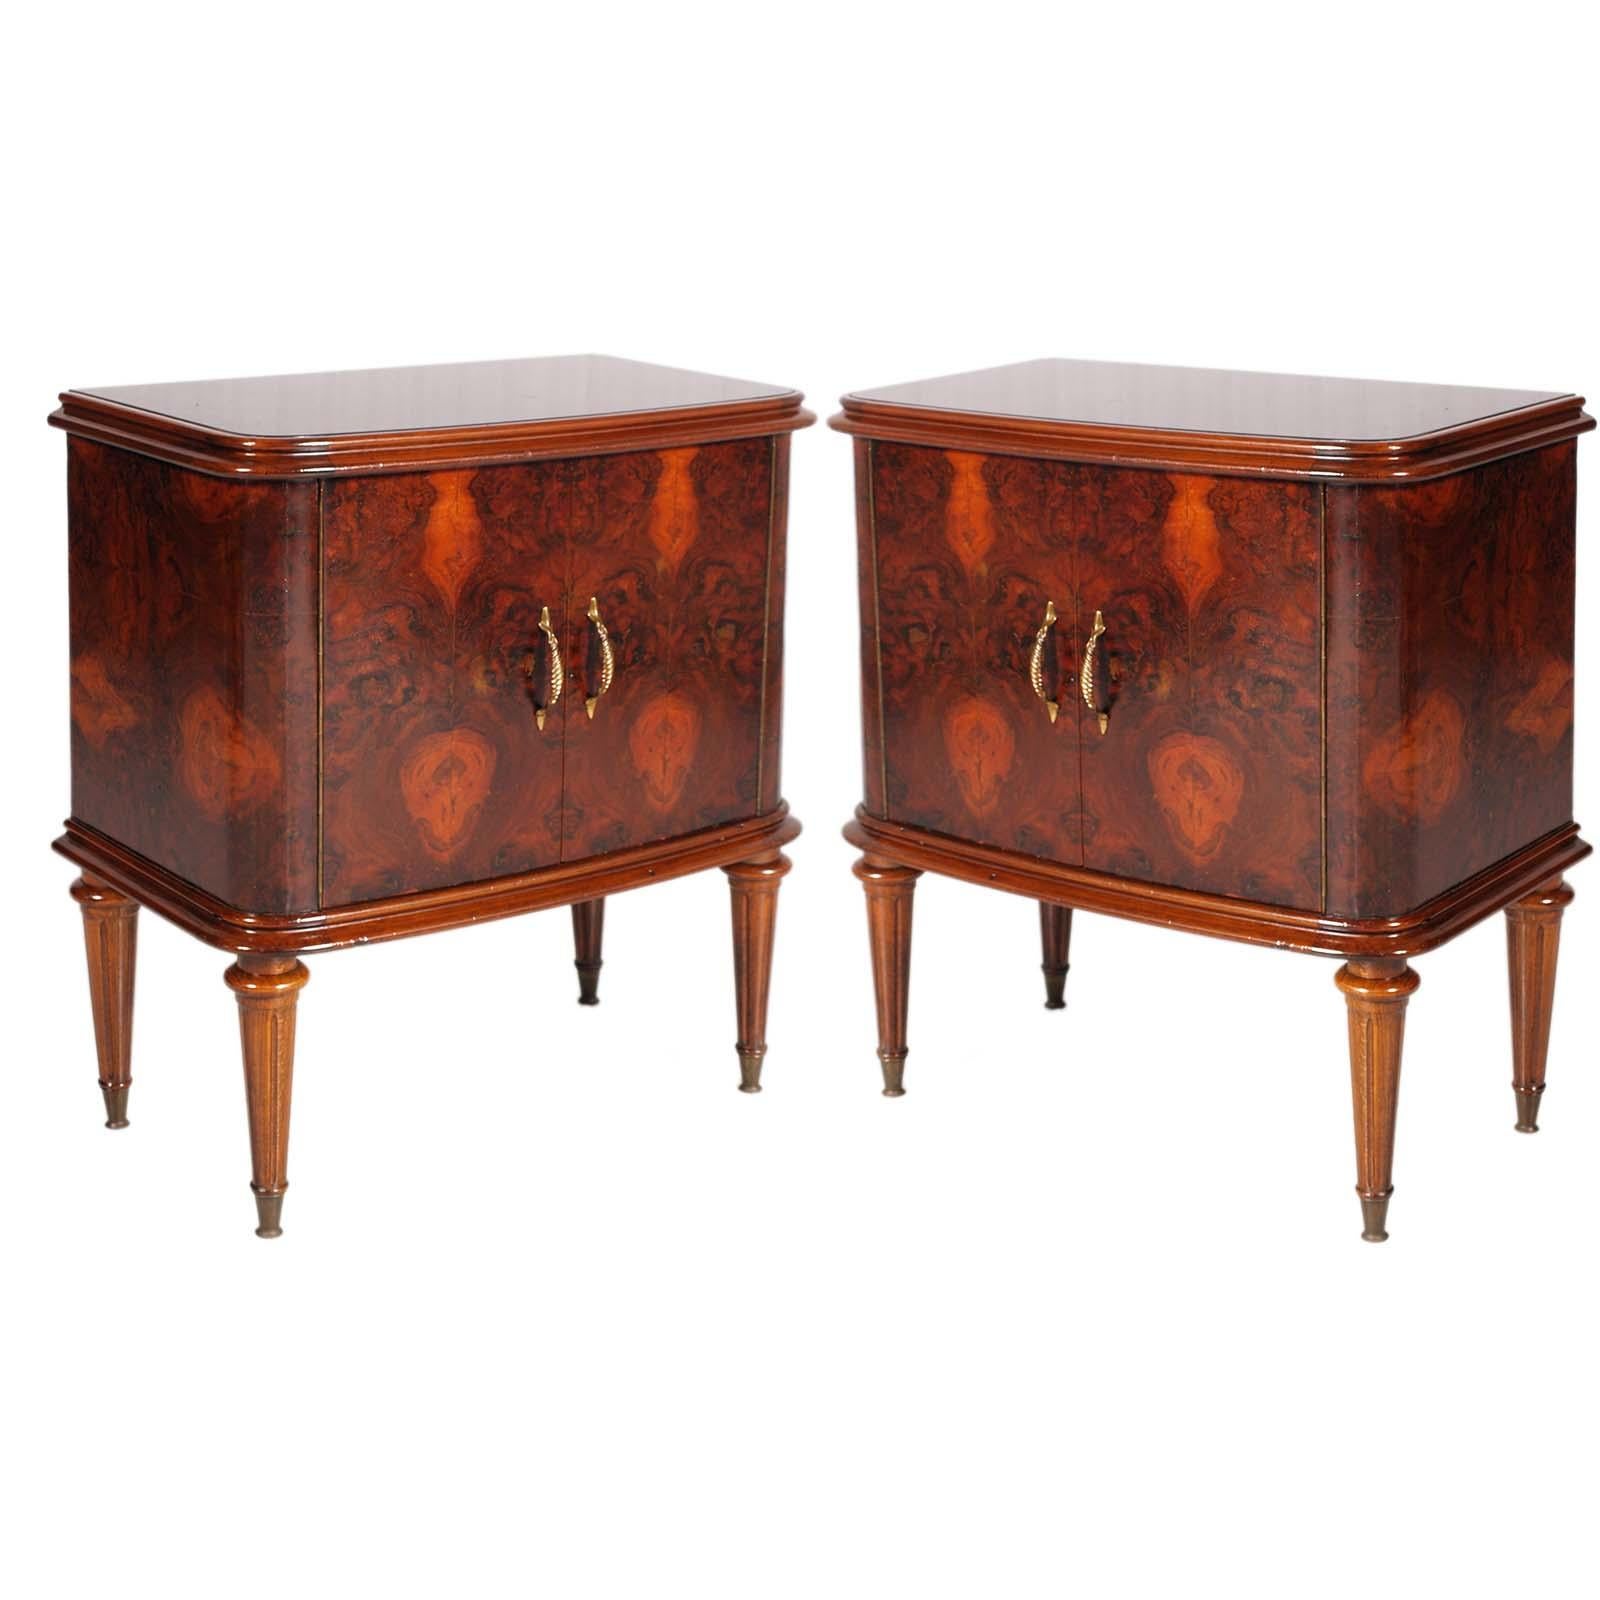 Art Deco nightstand , Walnut Root by Paolo Buffa for Permanente Mobili Cantù
Elegant Mid-Century modern two-door nightstand by Paolo Buffa for Permanente Mobili Cantù in walnut burl.  Accessories such as handles and feet made of gold-plated brass.